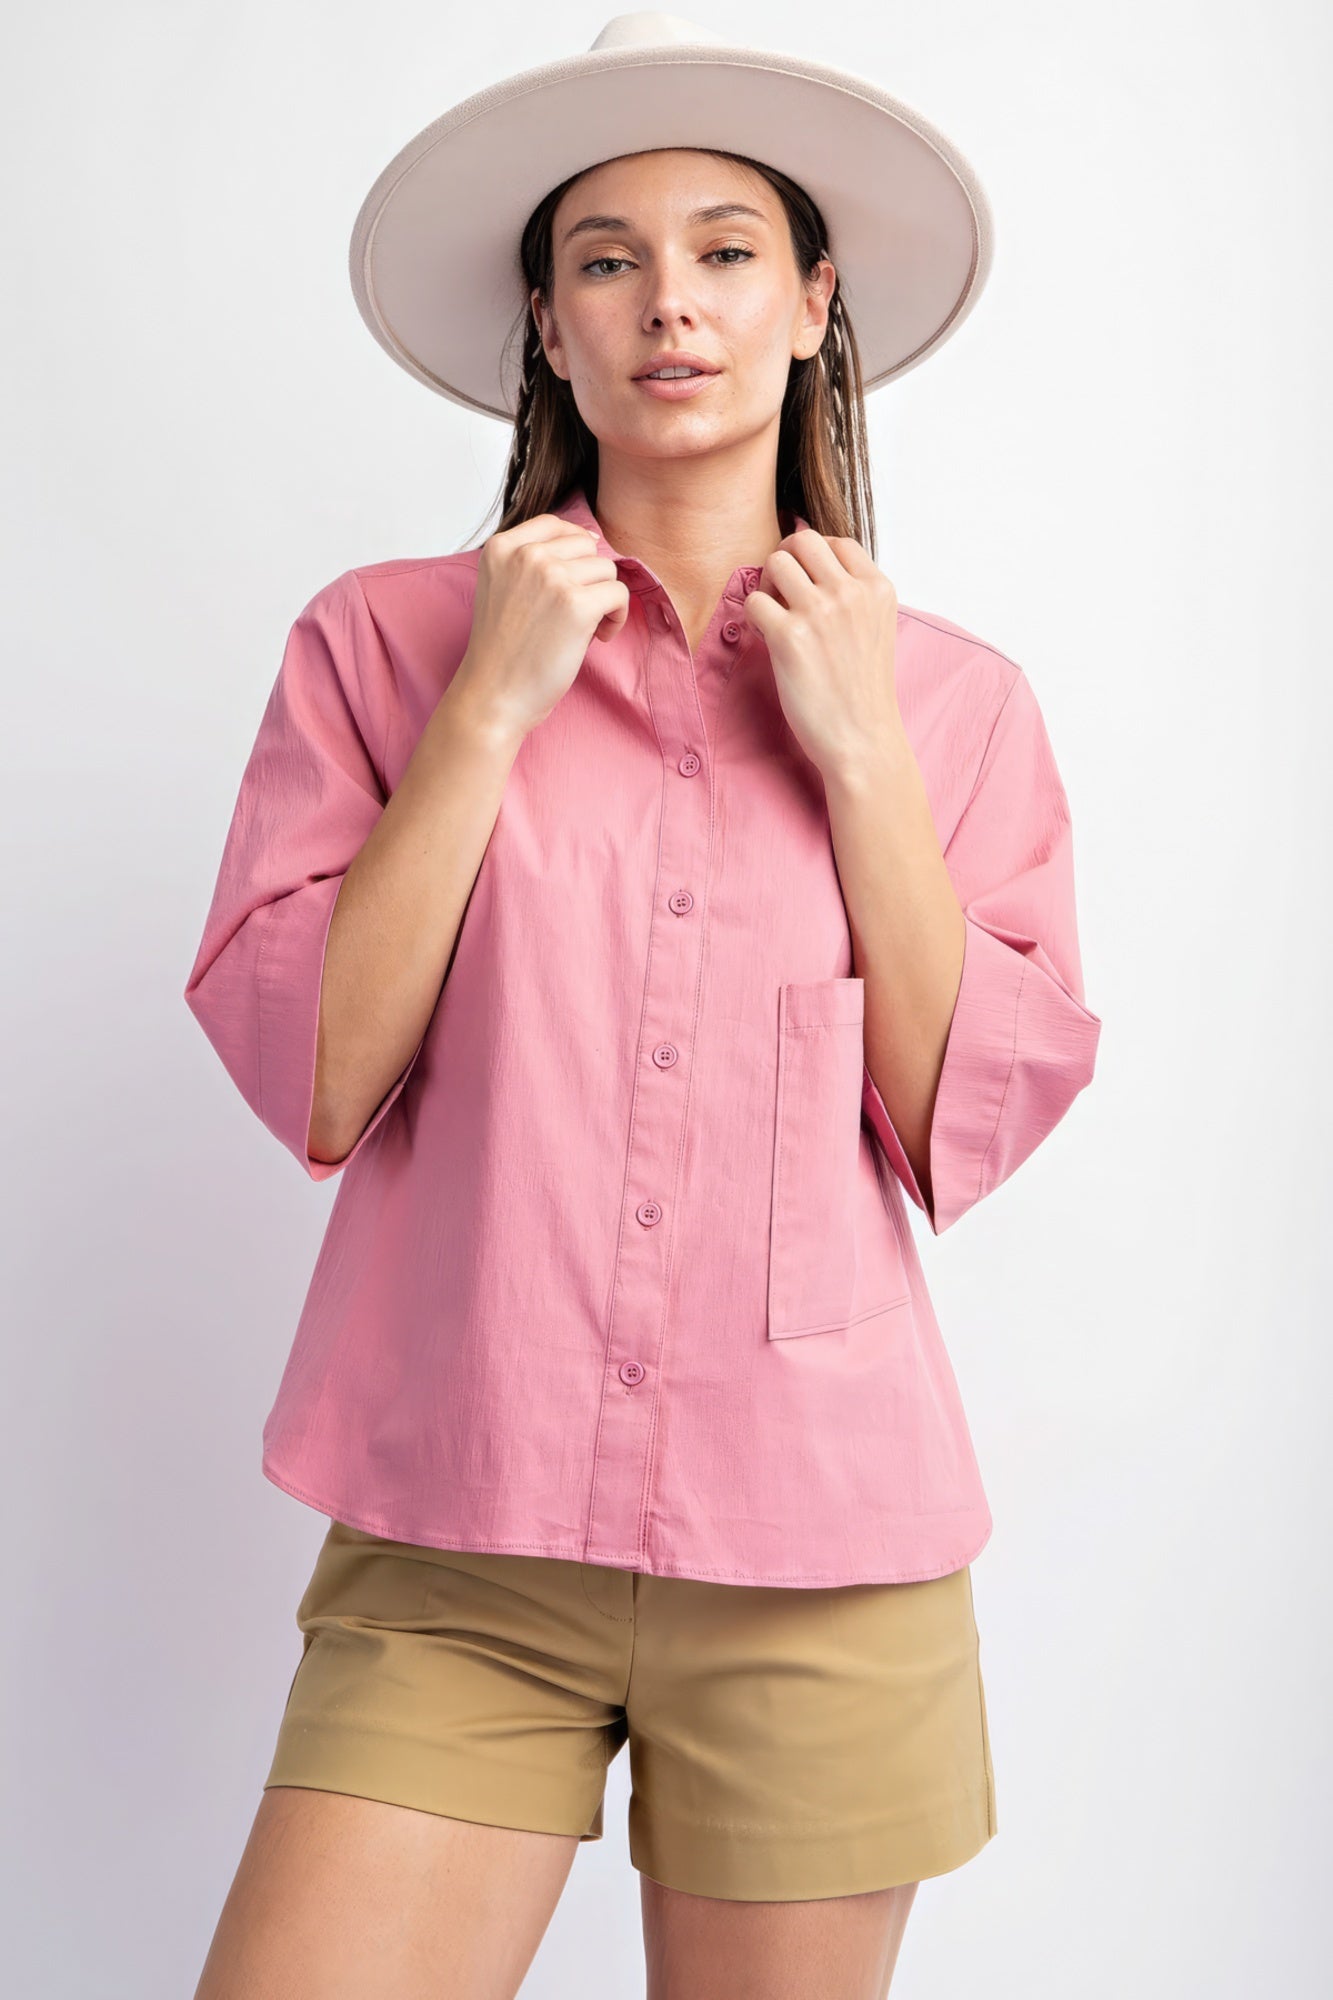 womens-fitted-dress-shirts